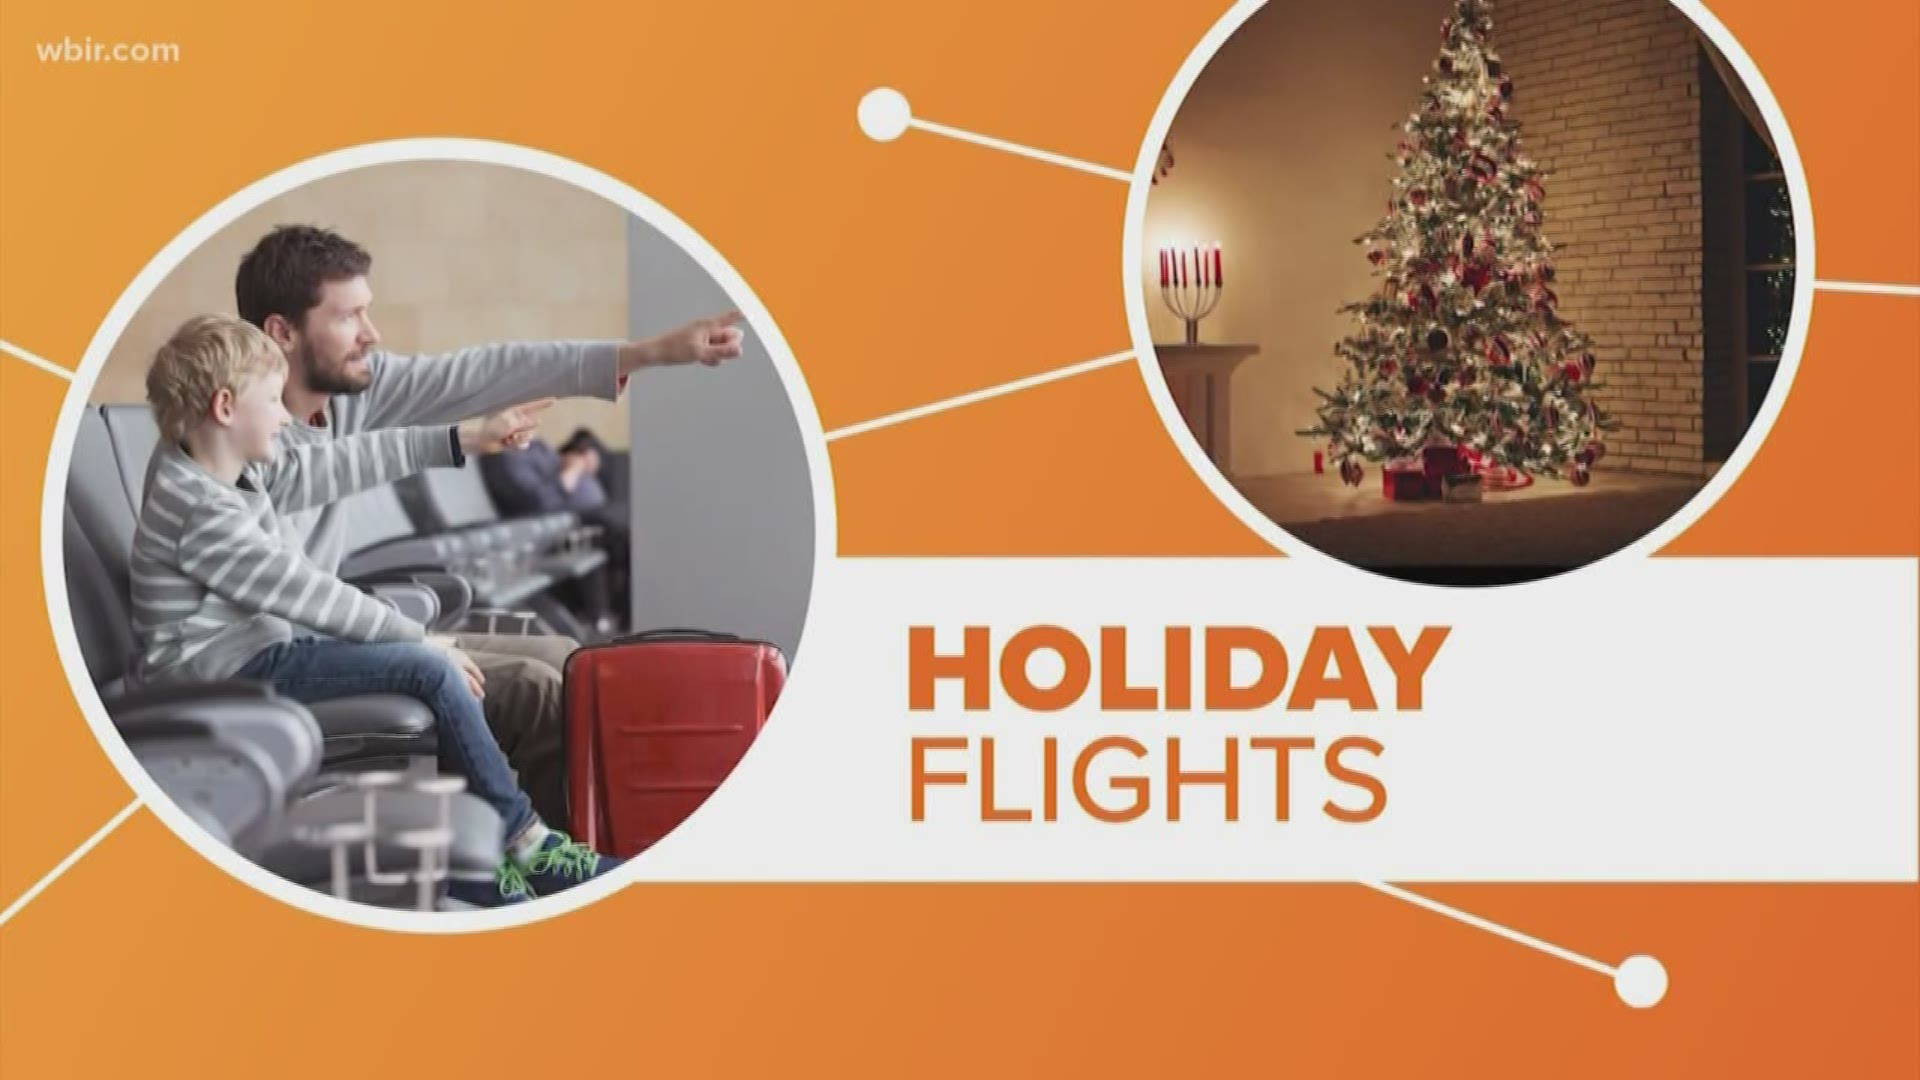 The best time to book a flight for your Christmas holiday.